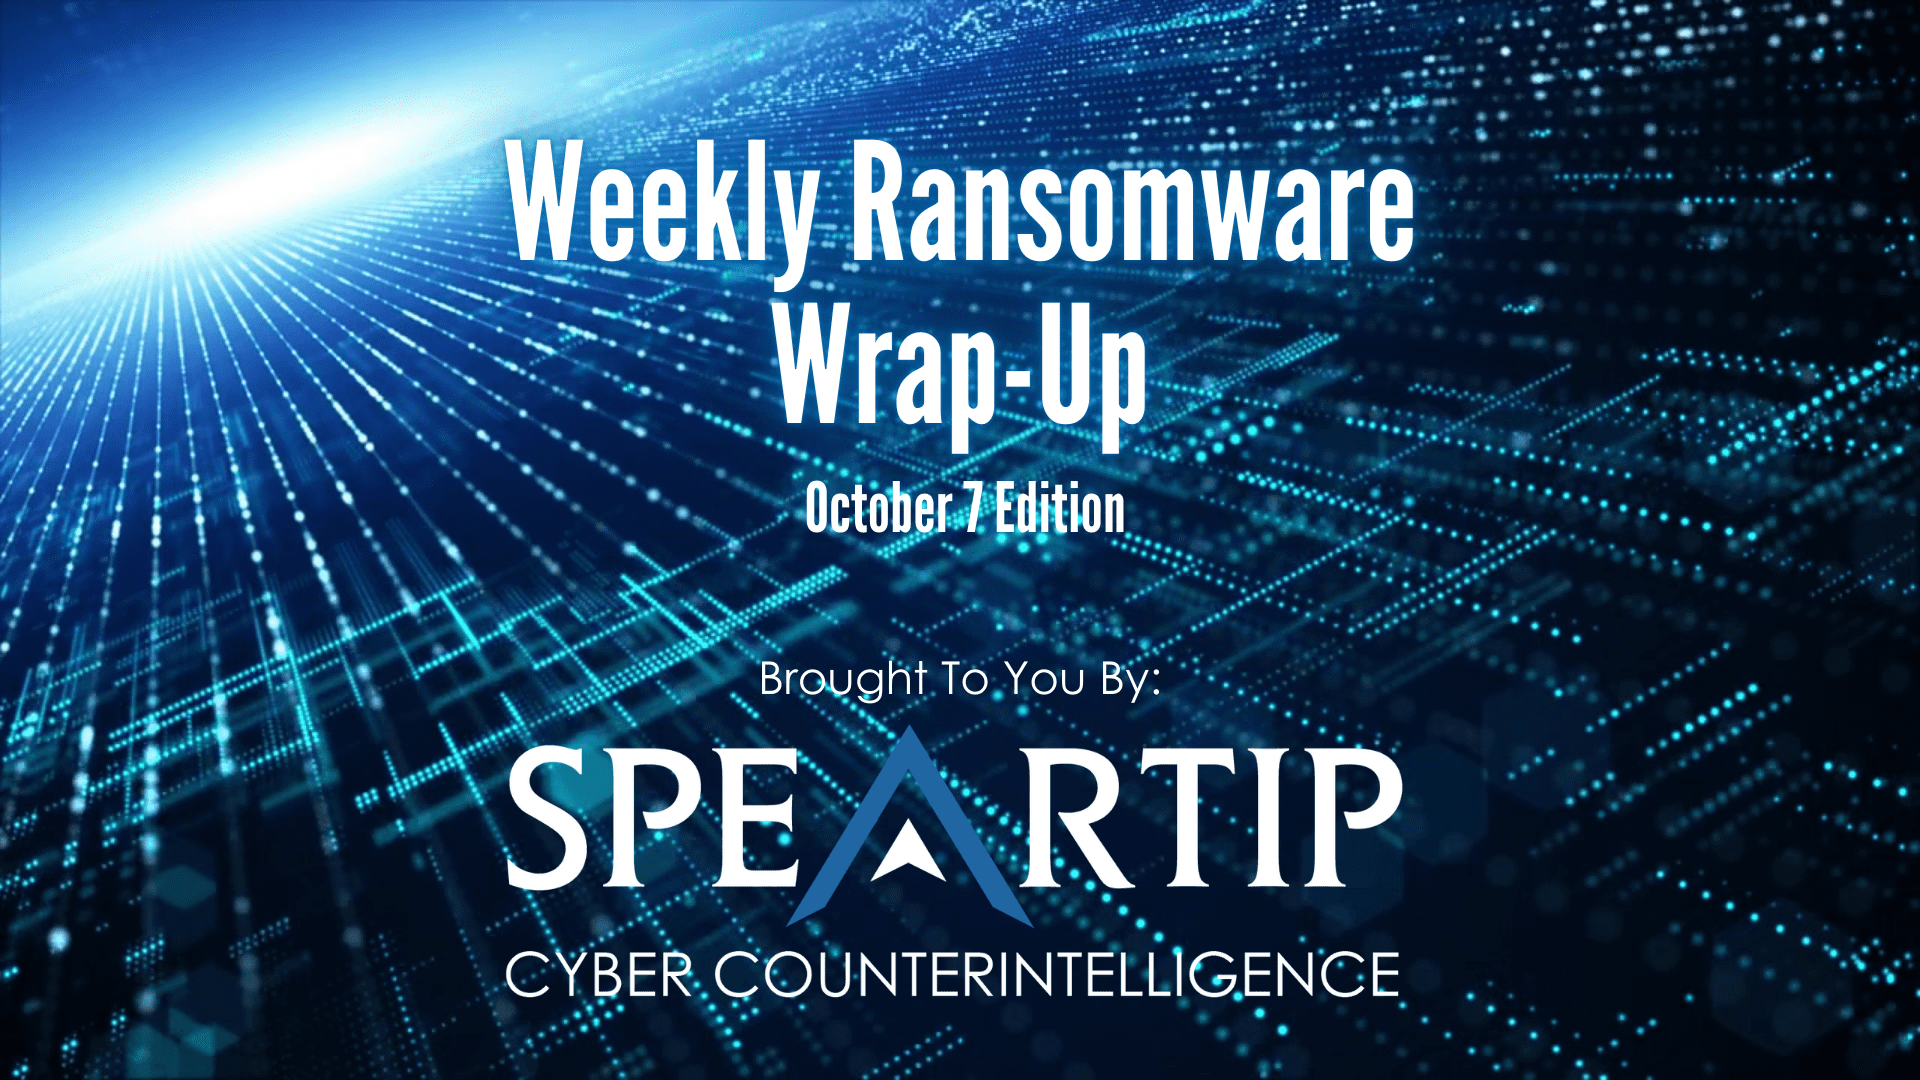 October 7, 2022 Ransomware Wrap-Up